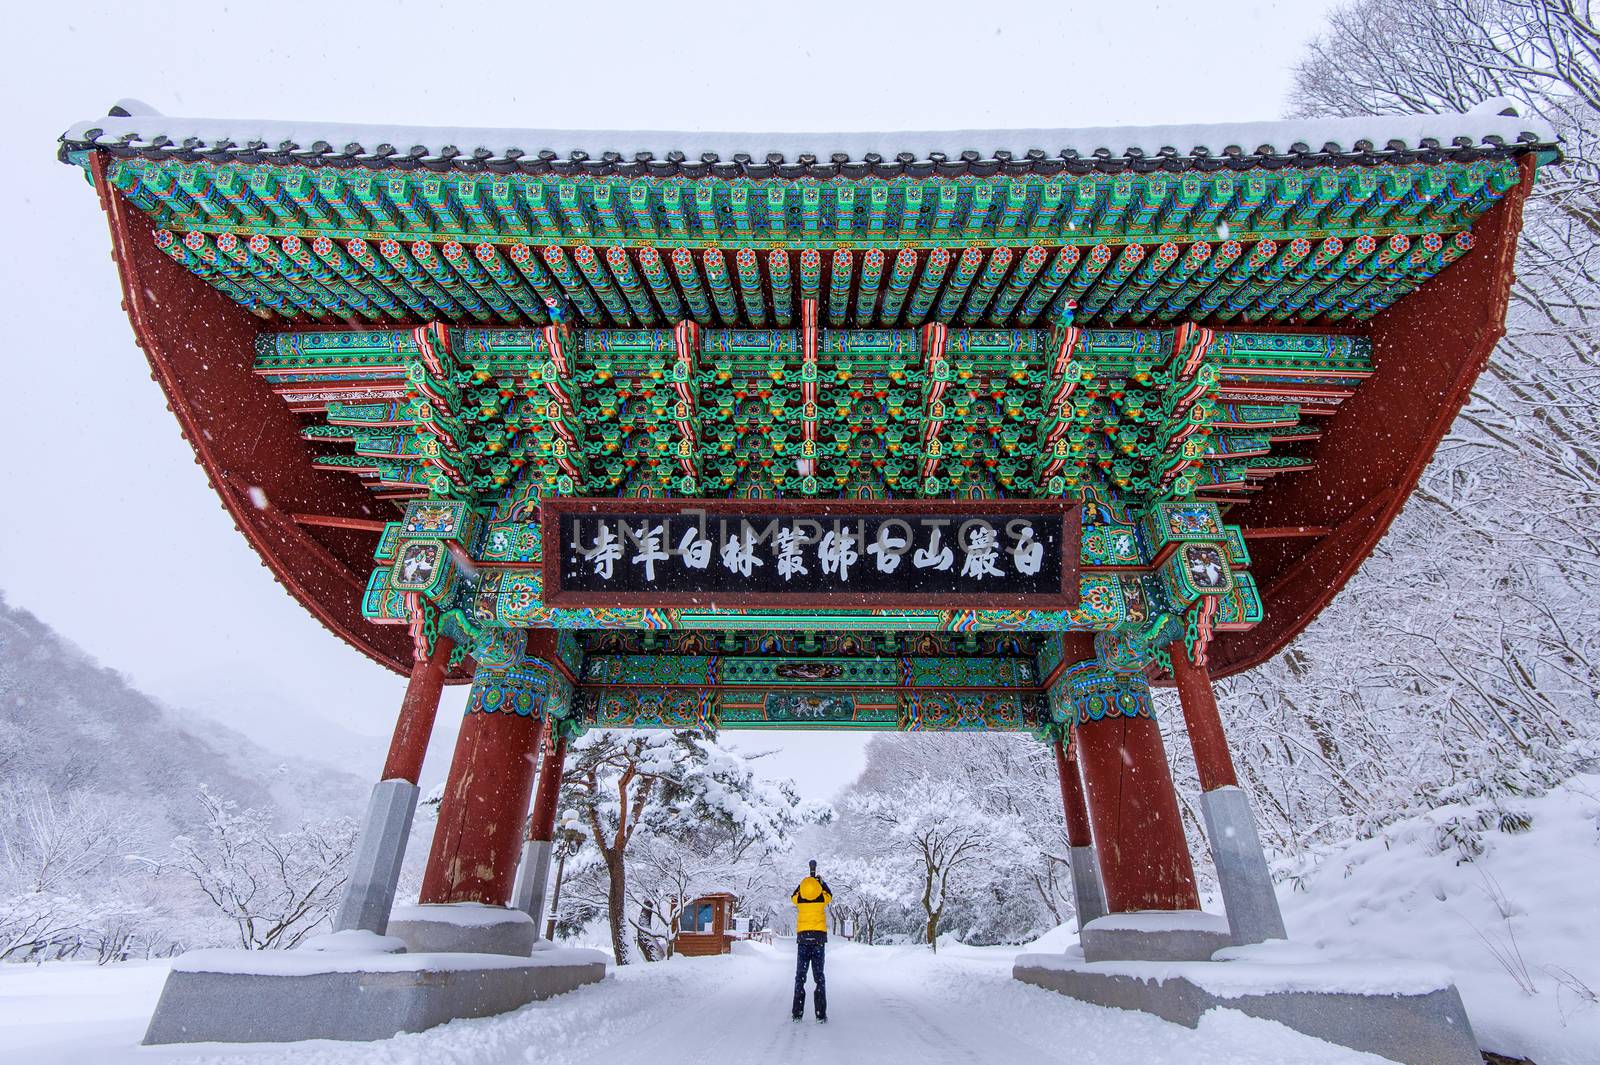 Professional photographer takes photos with camera at gate of Baekyangsa Temple and falling snow, Naejangsan Mountain in winter,South Korea.Winter landscape. by gutarphotoghaphy